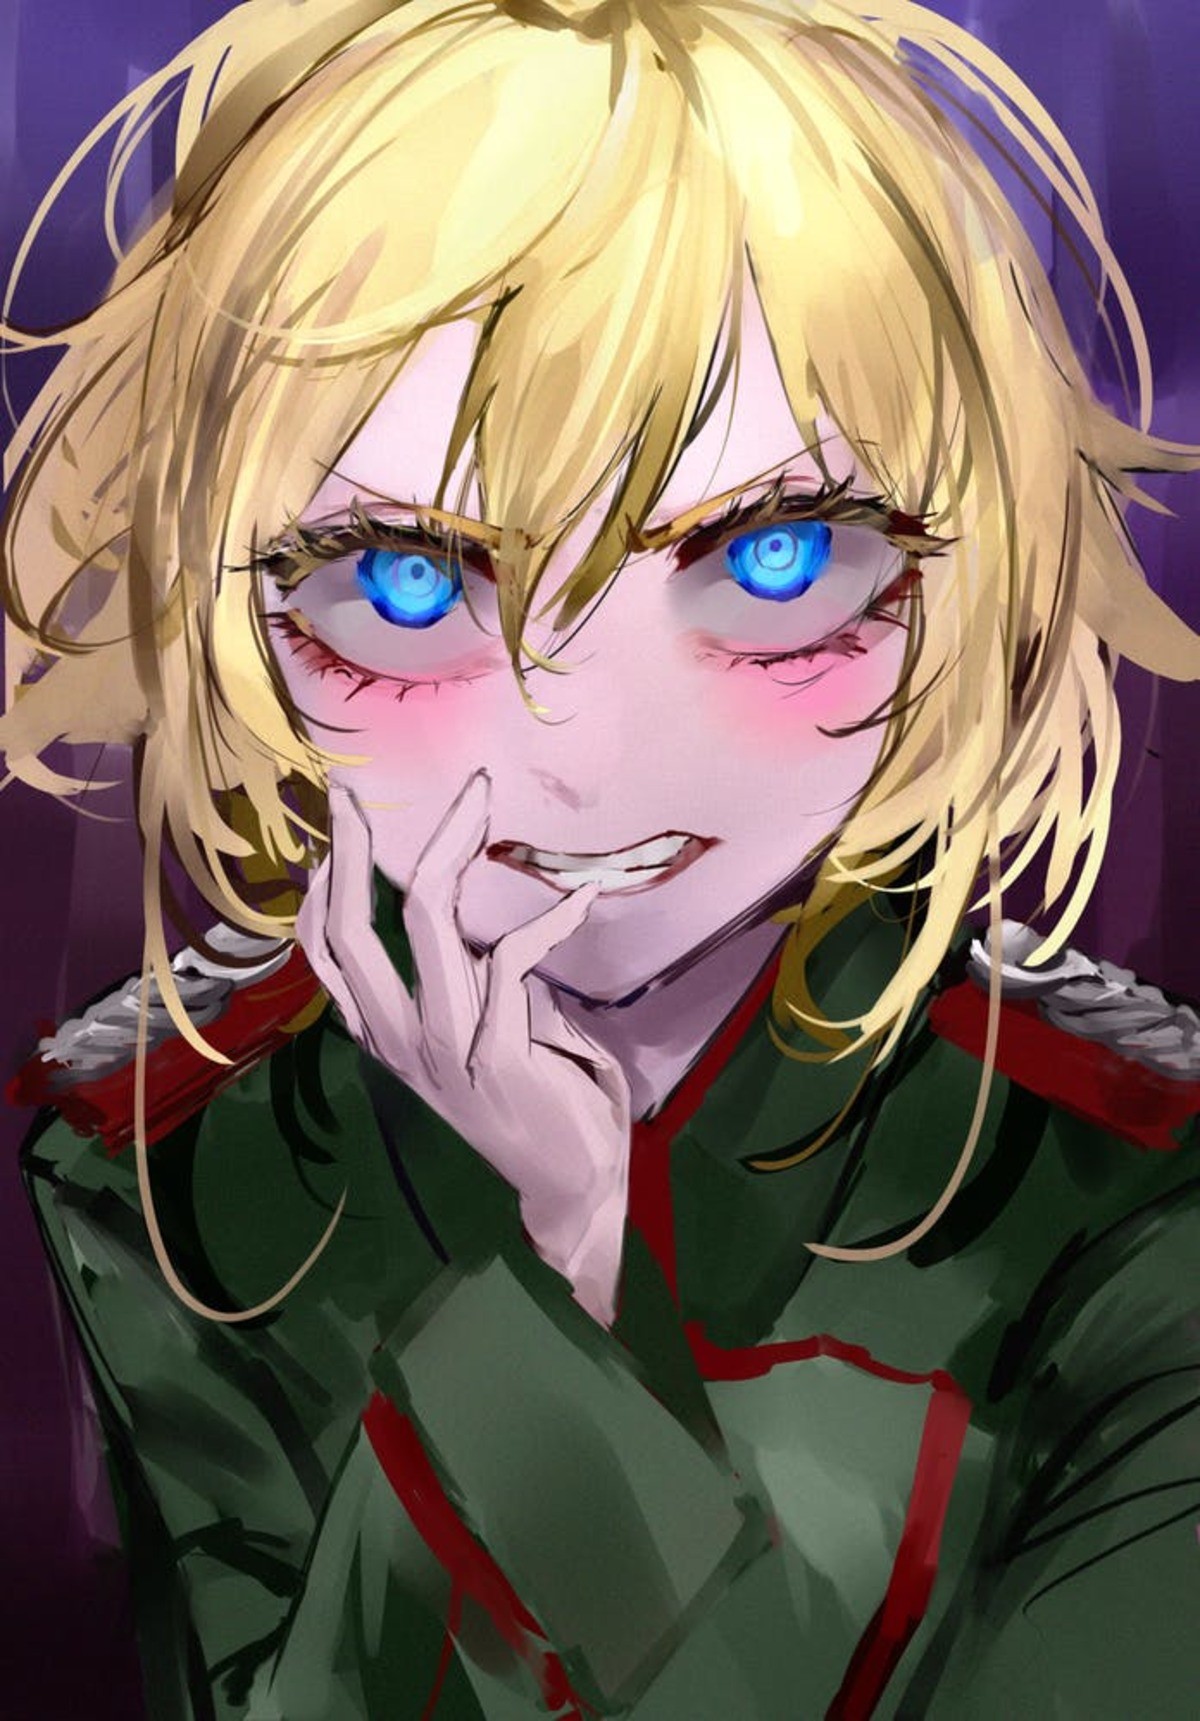 Daily Tanya - 1066: Big Think. join list: DailyTanya (595 subs)Mention History Source: mile (off8mile) .. How best to use super napalm to burn Communist